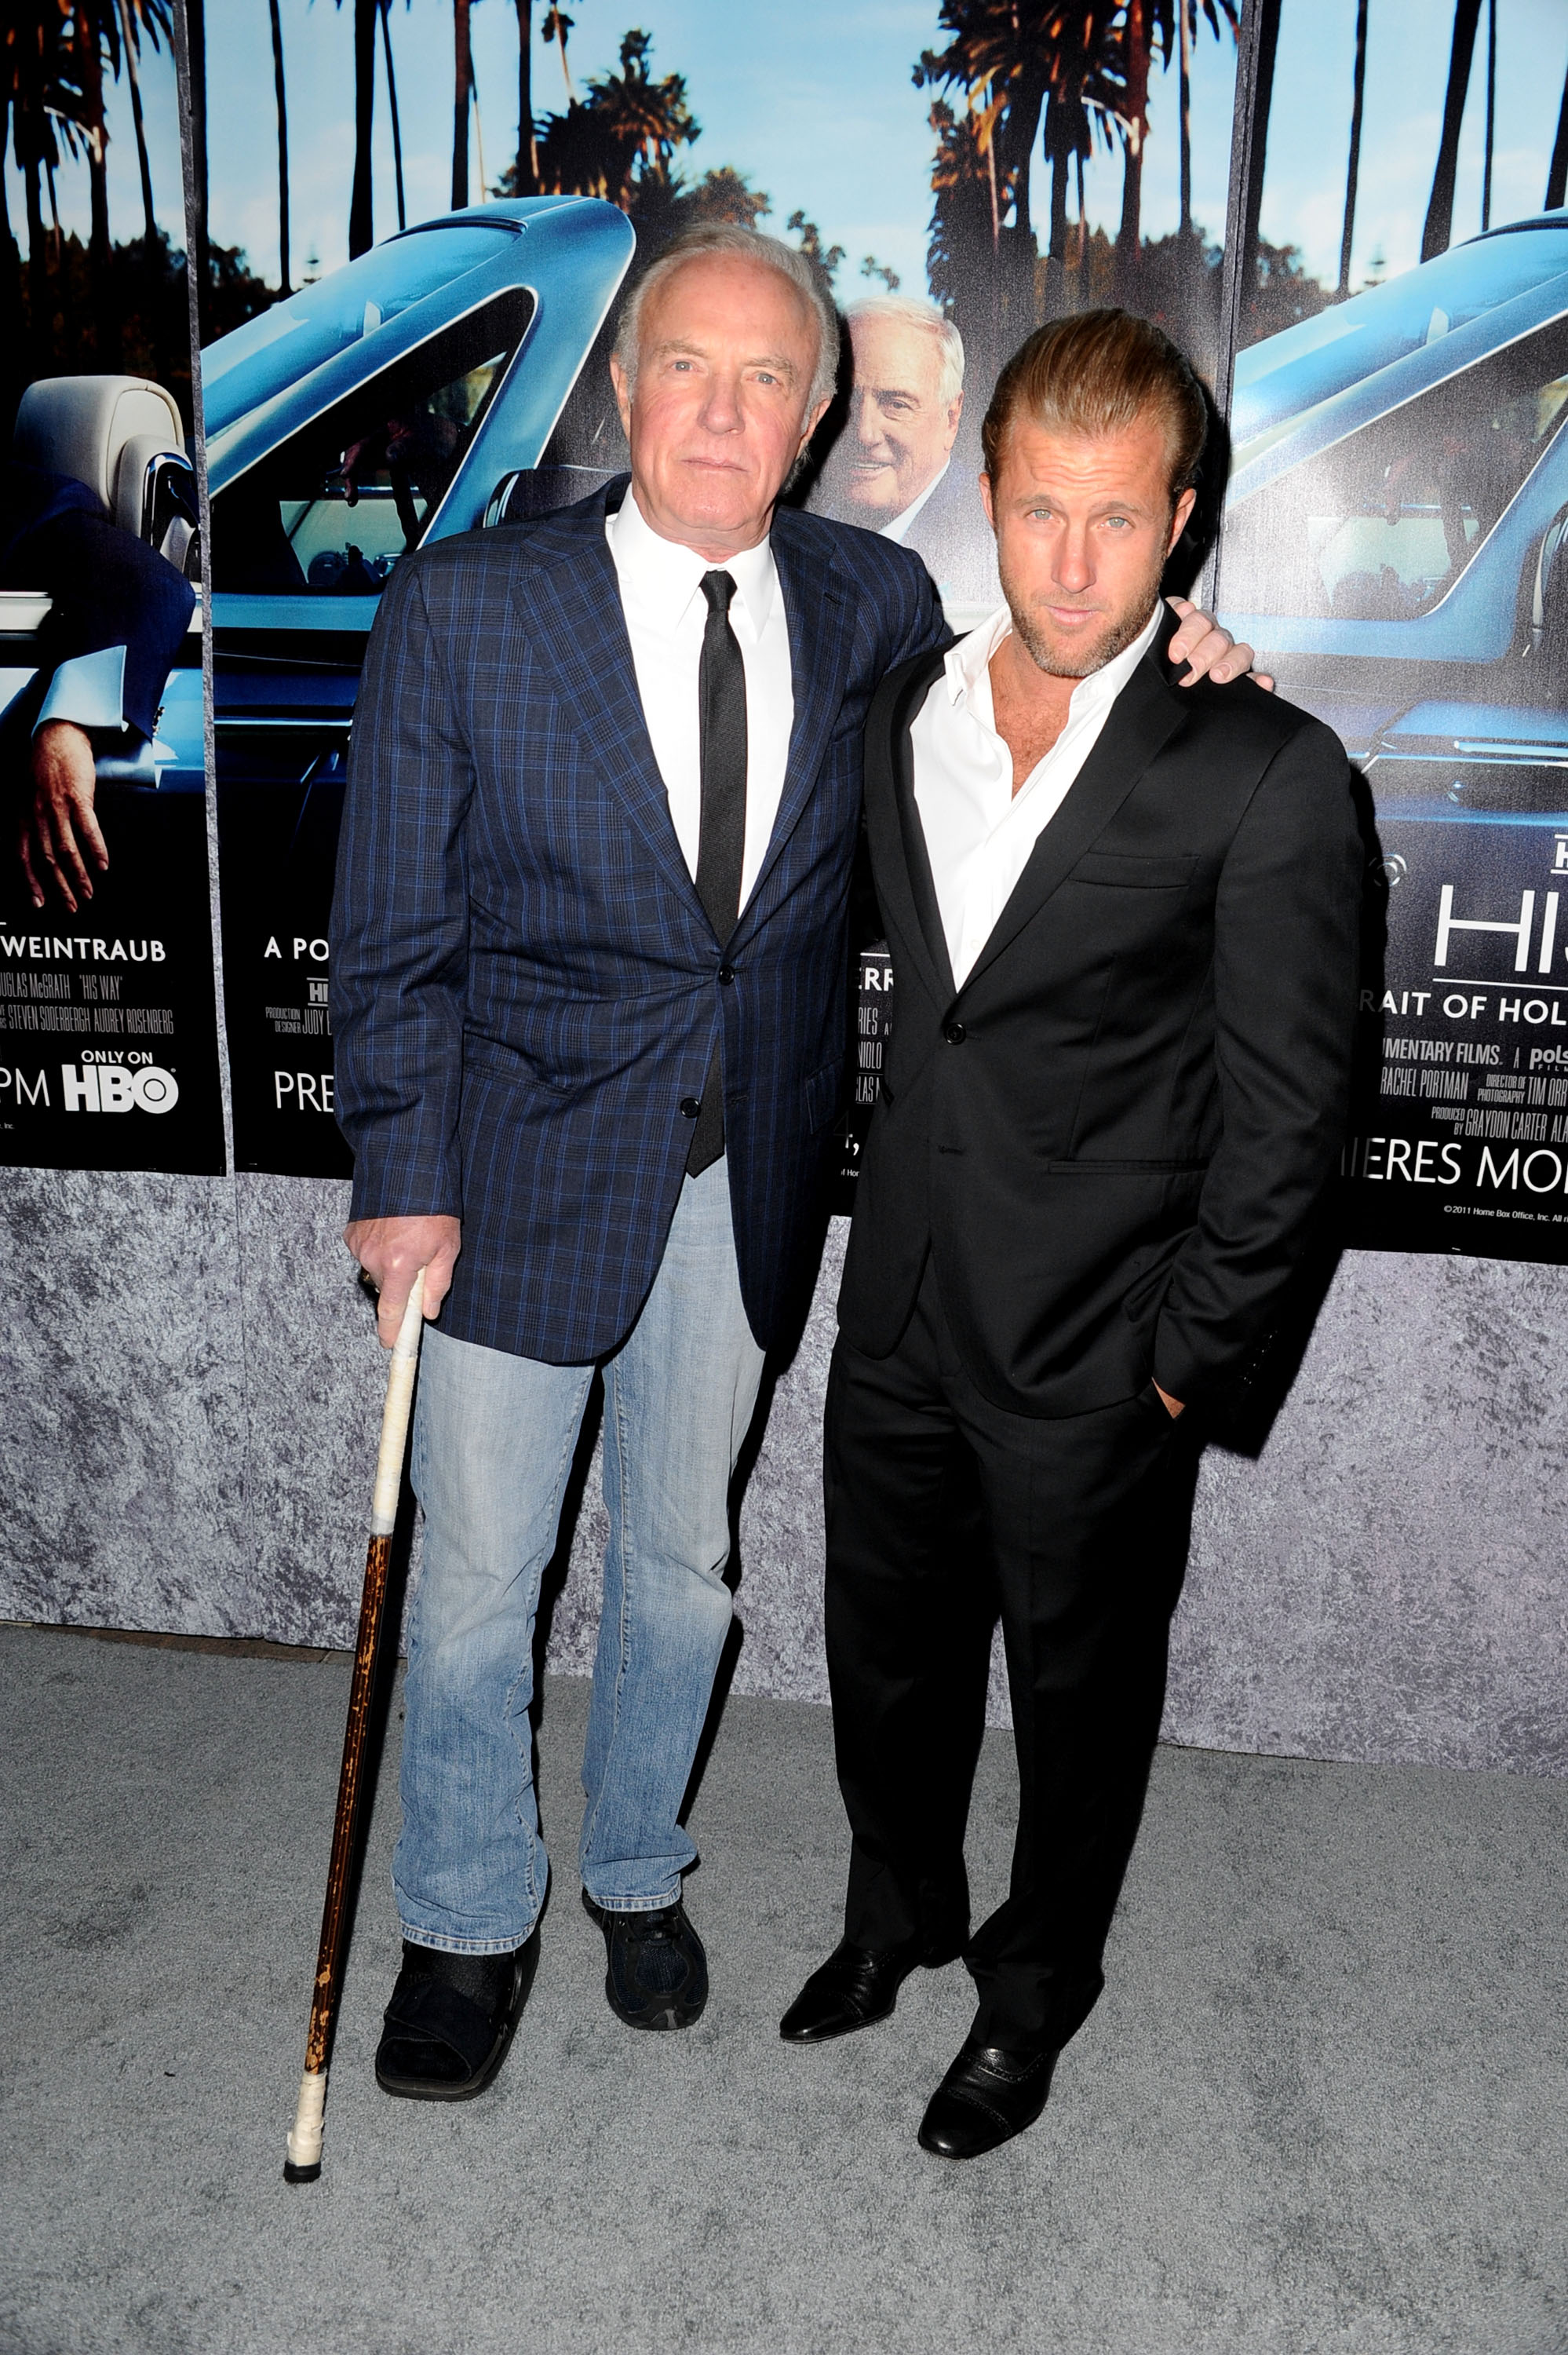 James and Scott Caan at the premiere of "His Way" at Paramount Studios on March 22, 2011, in Hollywood, California. | Source: Getty Images